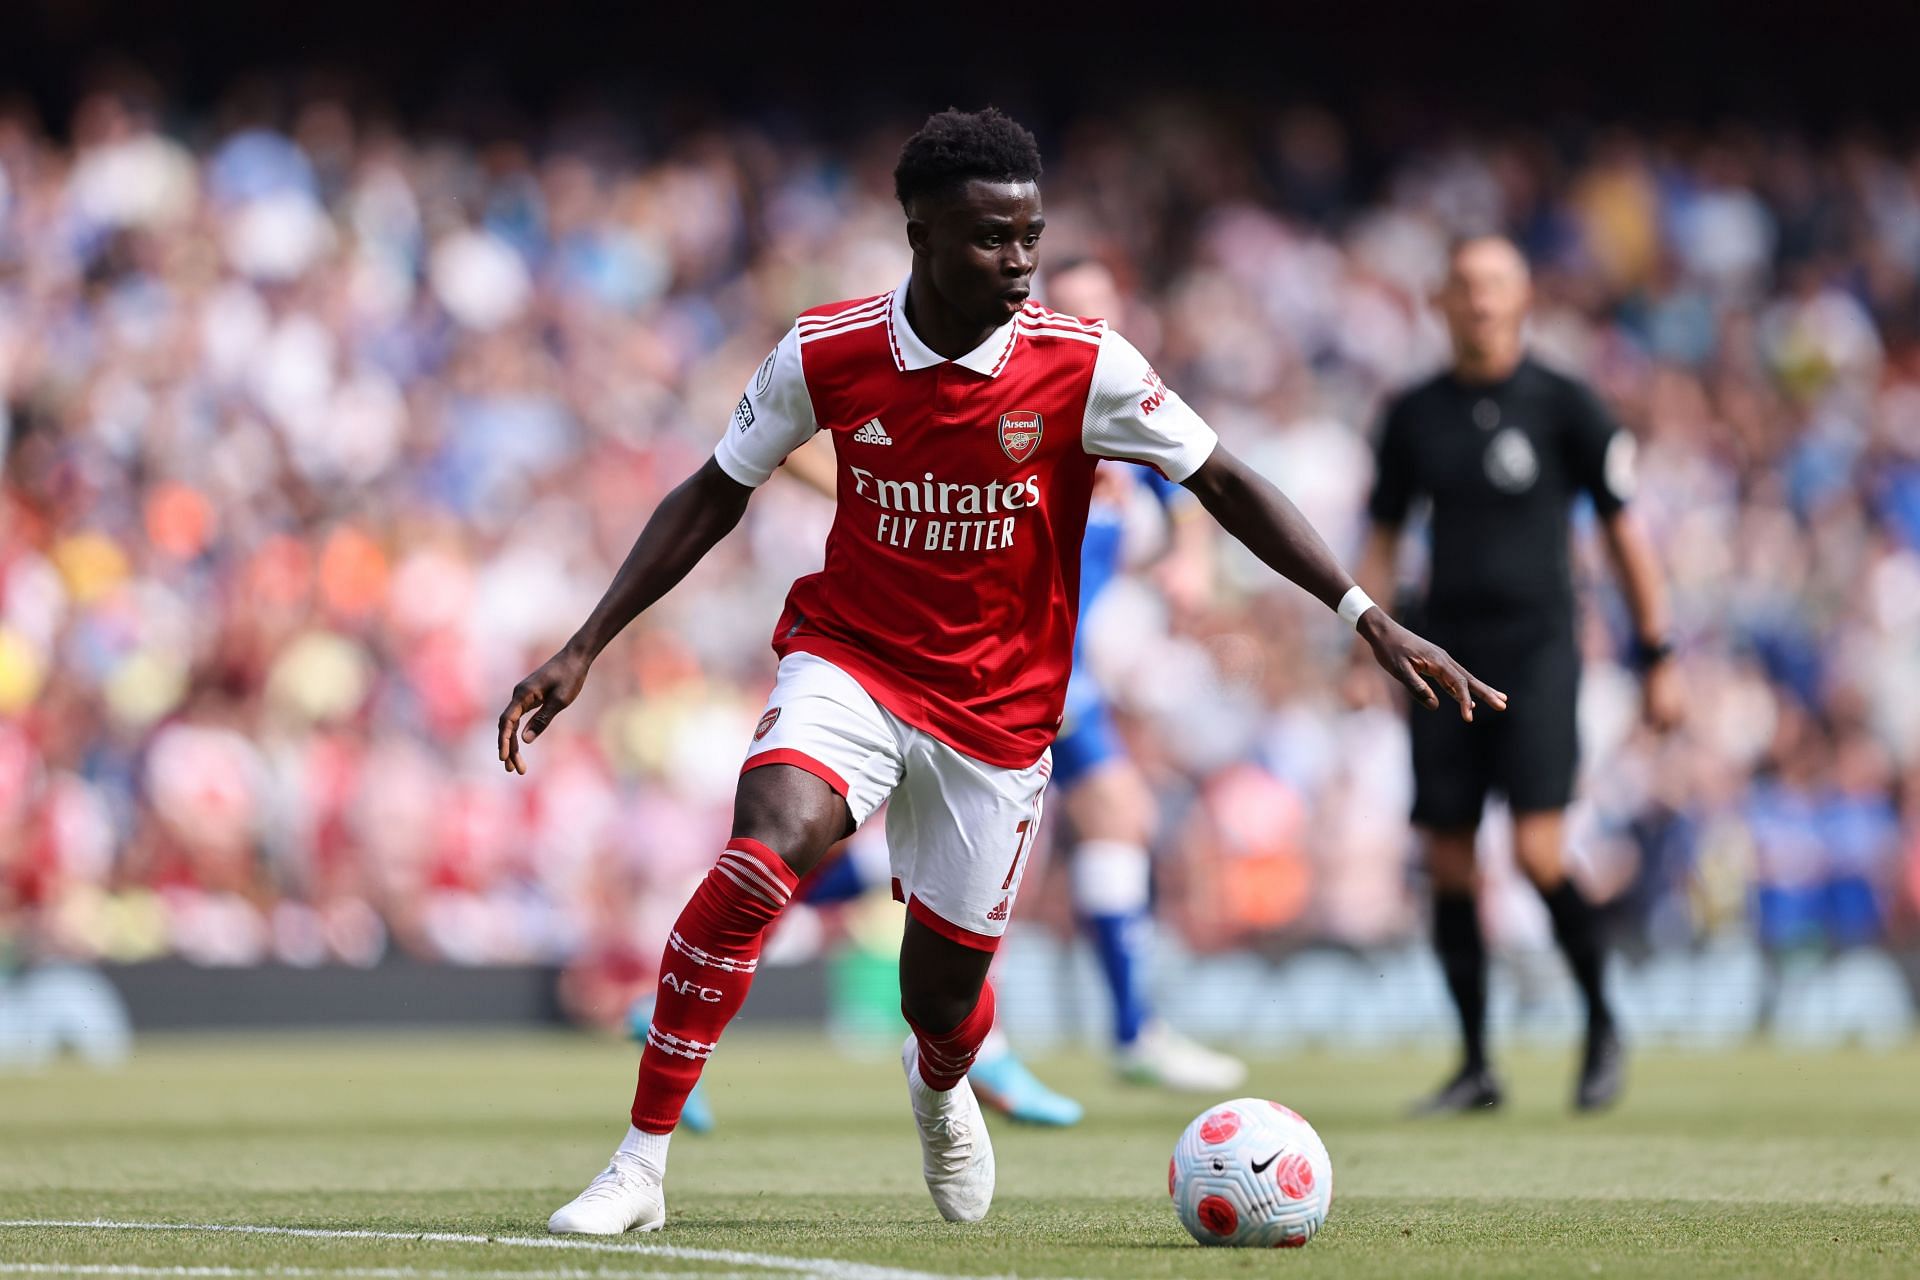 Bukayo Saka is certain to get good transfer deals in the future